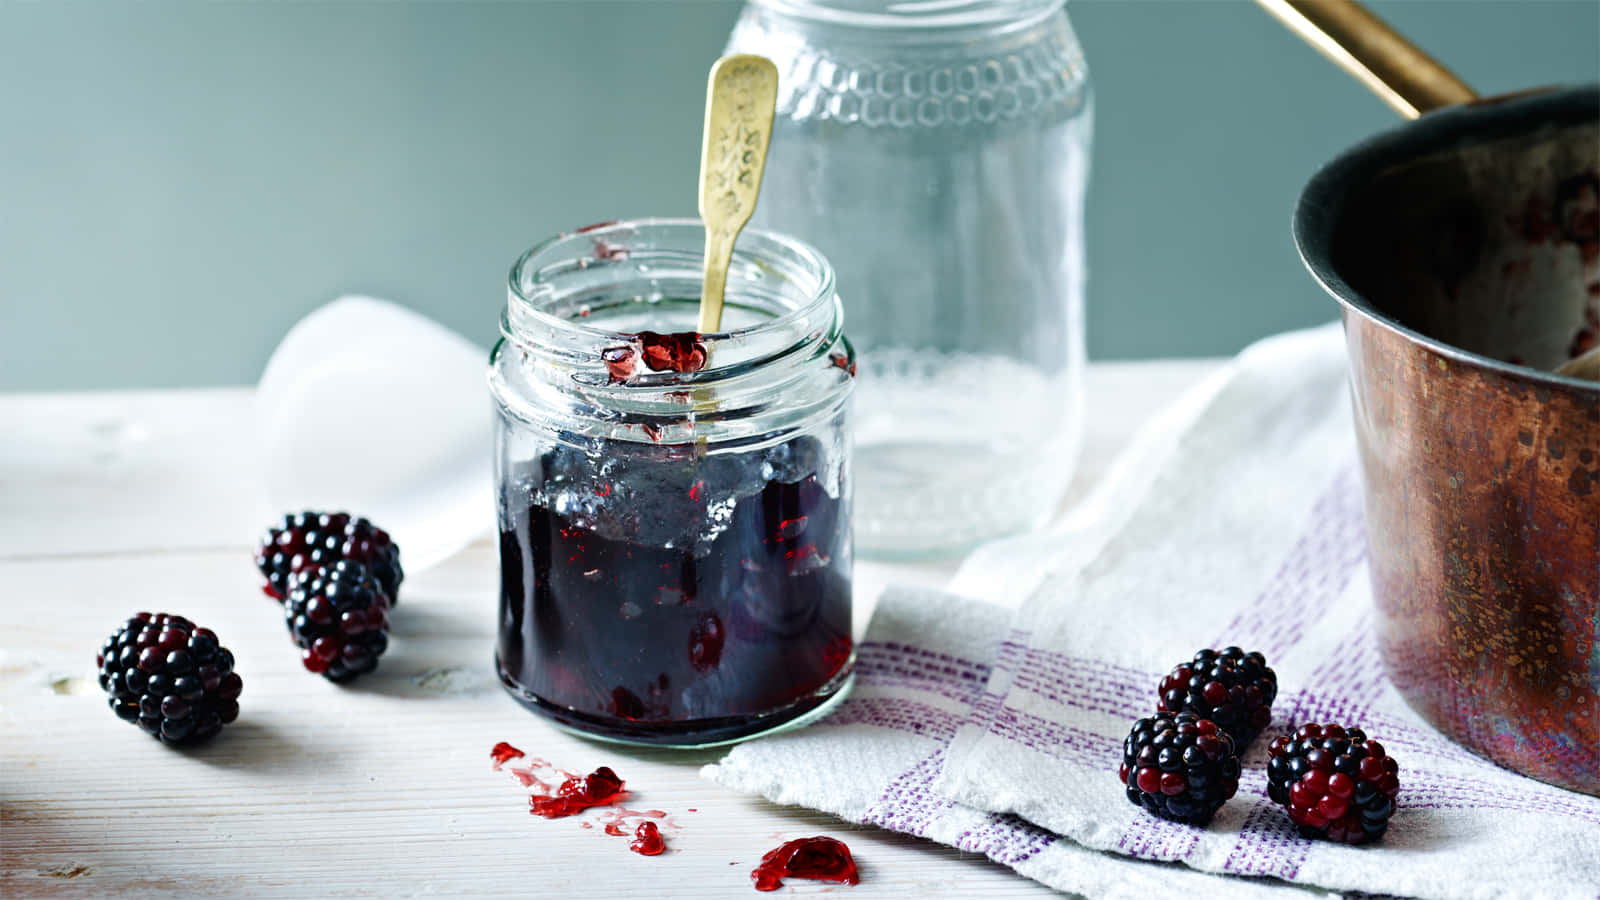 Get creative in the kitchen with homemade Blackberry Jam! Wallpaper